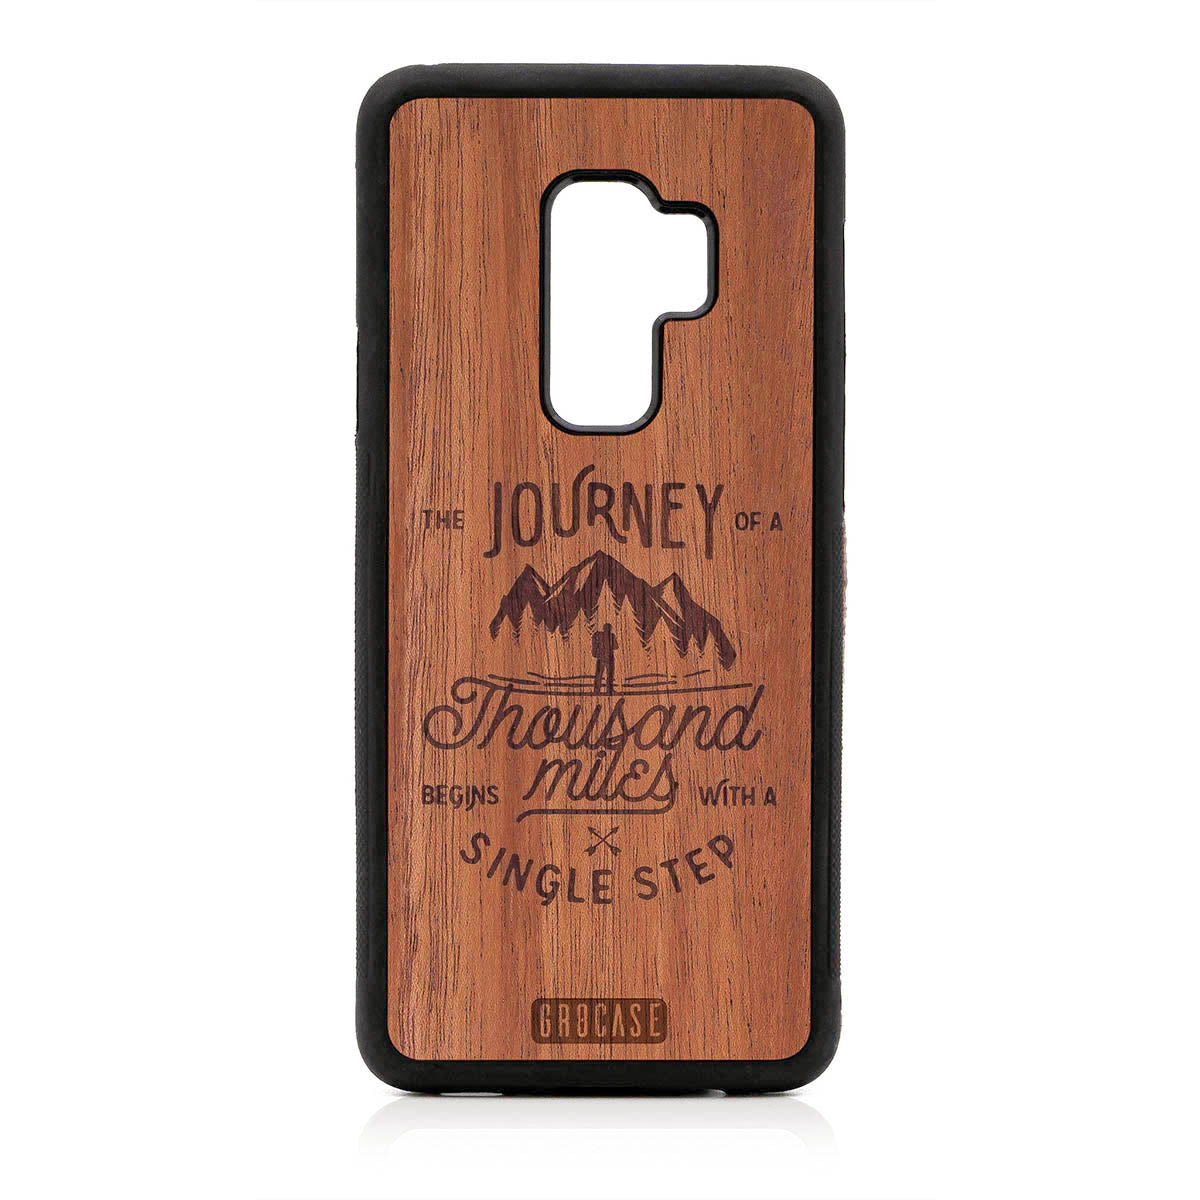 The Journey Of A Thousand Miles Begins With A Single Step Design Wood Case For Samsung Galaxy S9 Plus